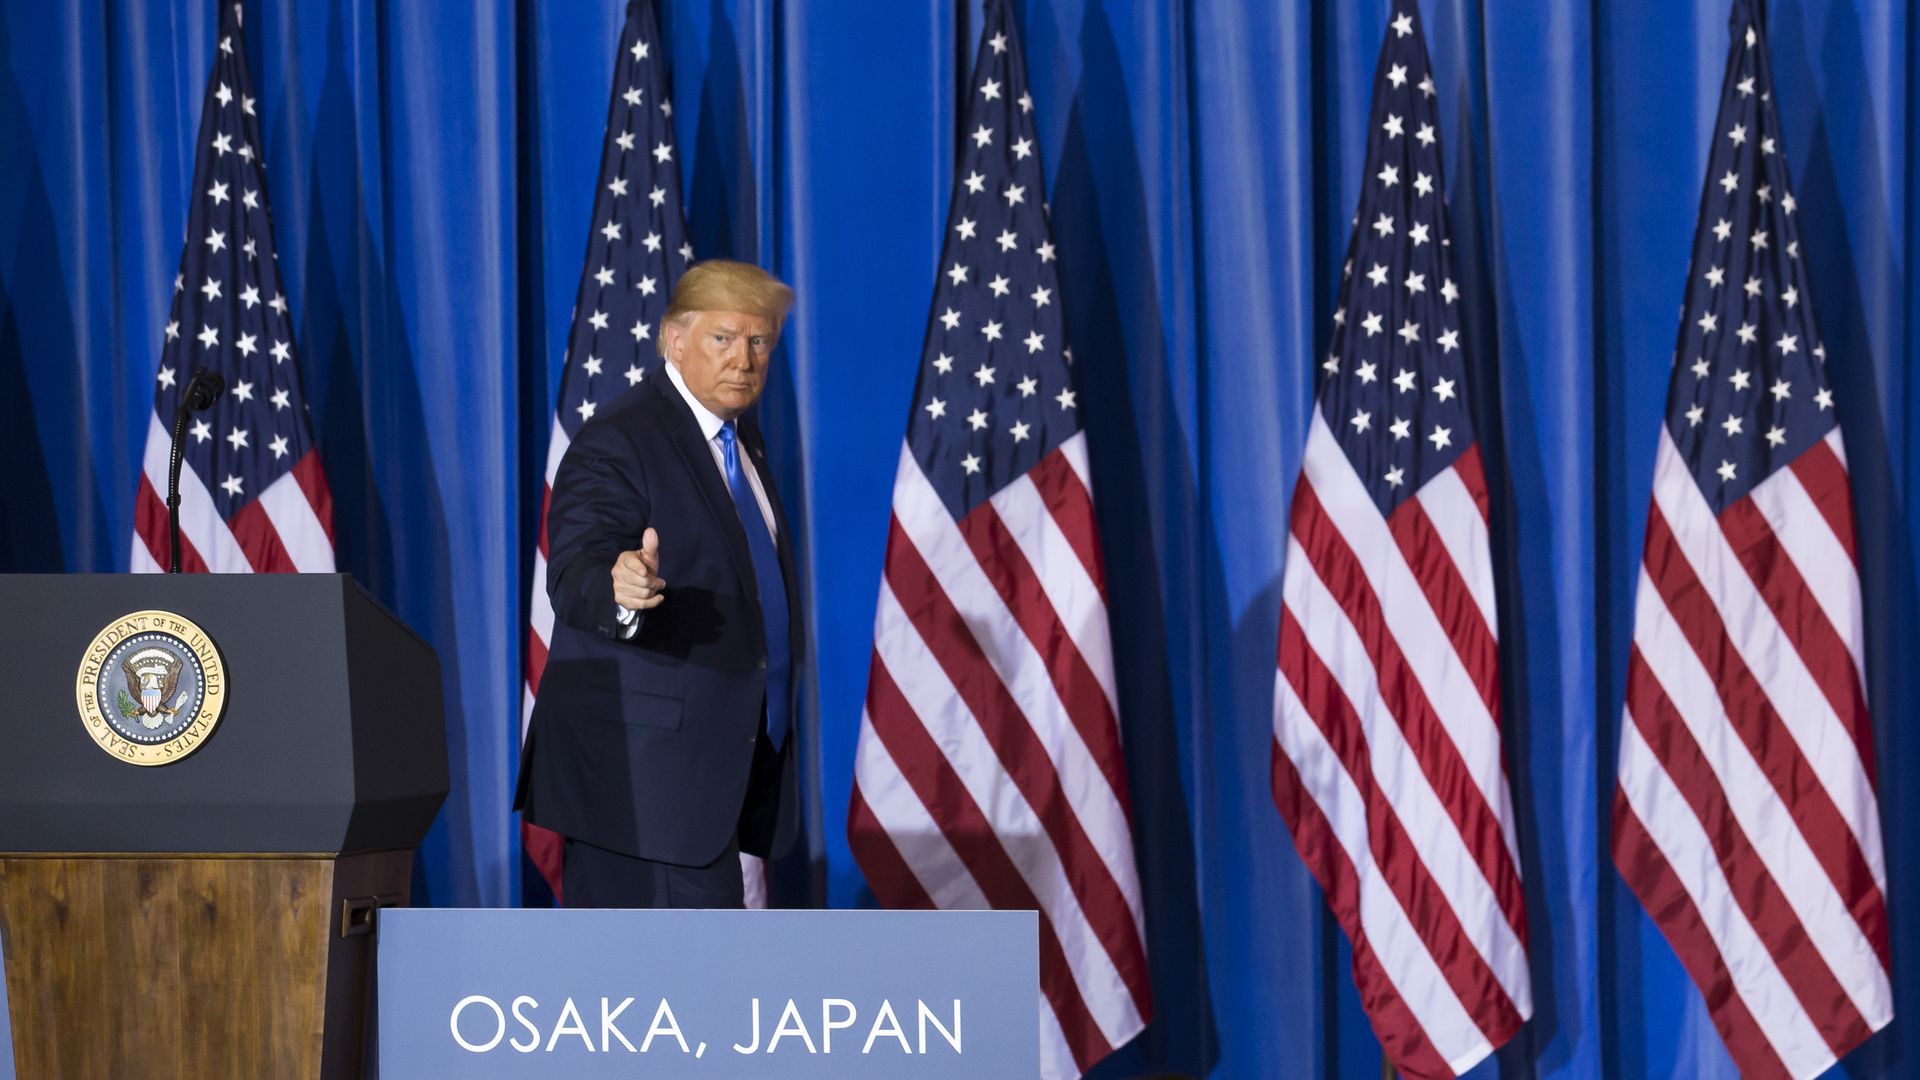 President Trump on stage after a press conference in Japan.